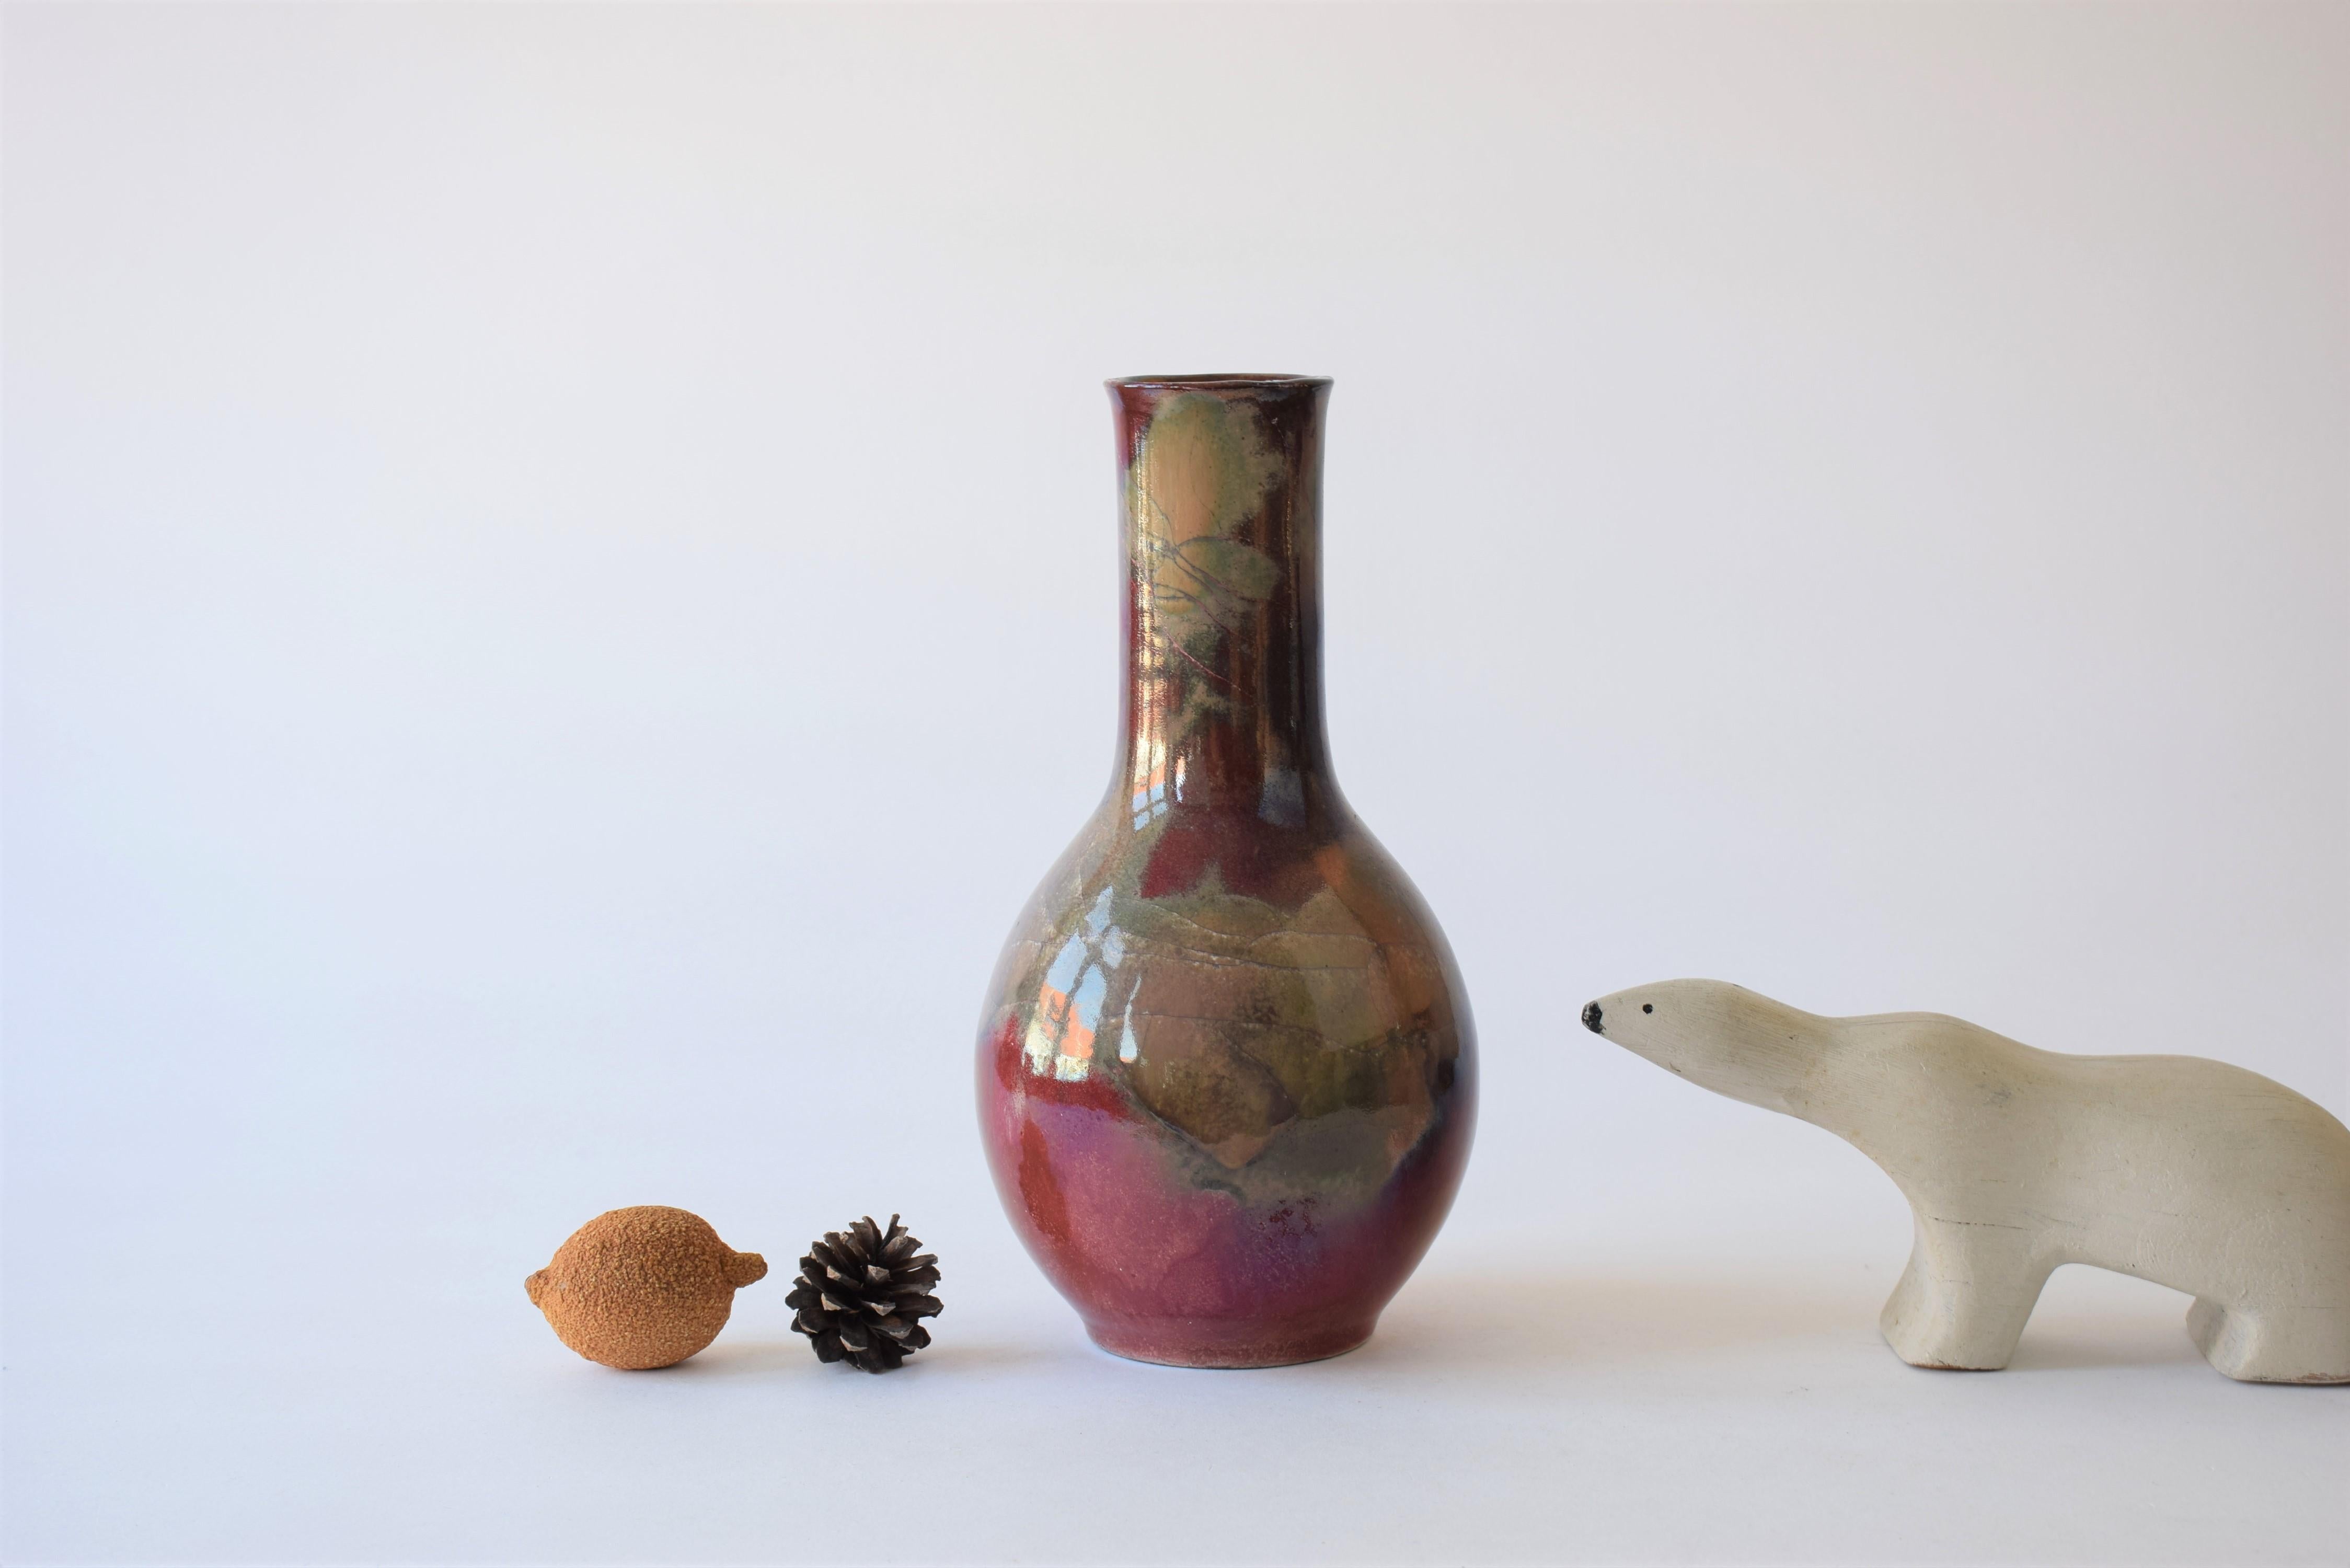 Tall vase from the Danish ceramic workshop Herman August Kähler (HAK). It has a stunning glaze with lots of red lustre and greyish elements. It looks very different from the different angles. It's made from earthenware and was manufactured in the